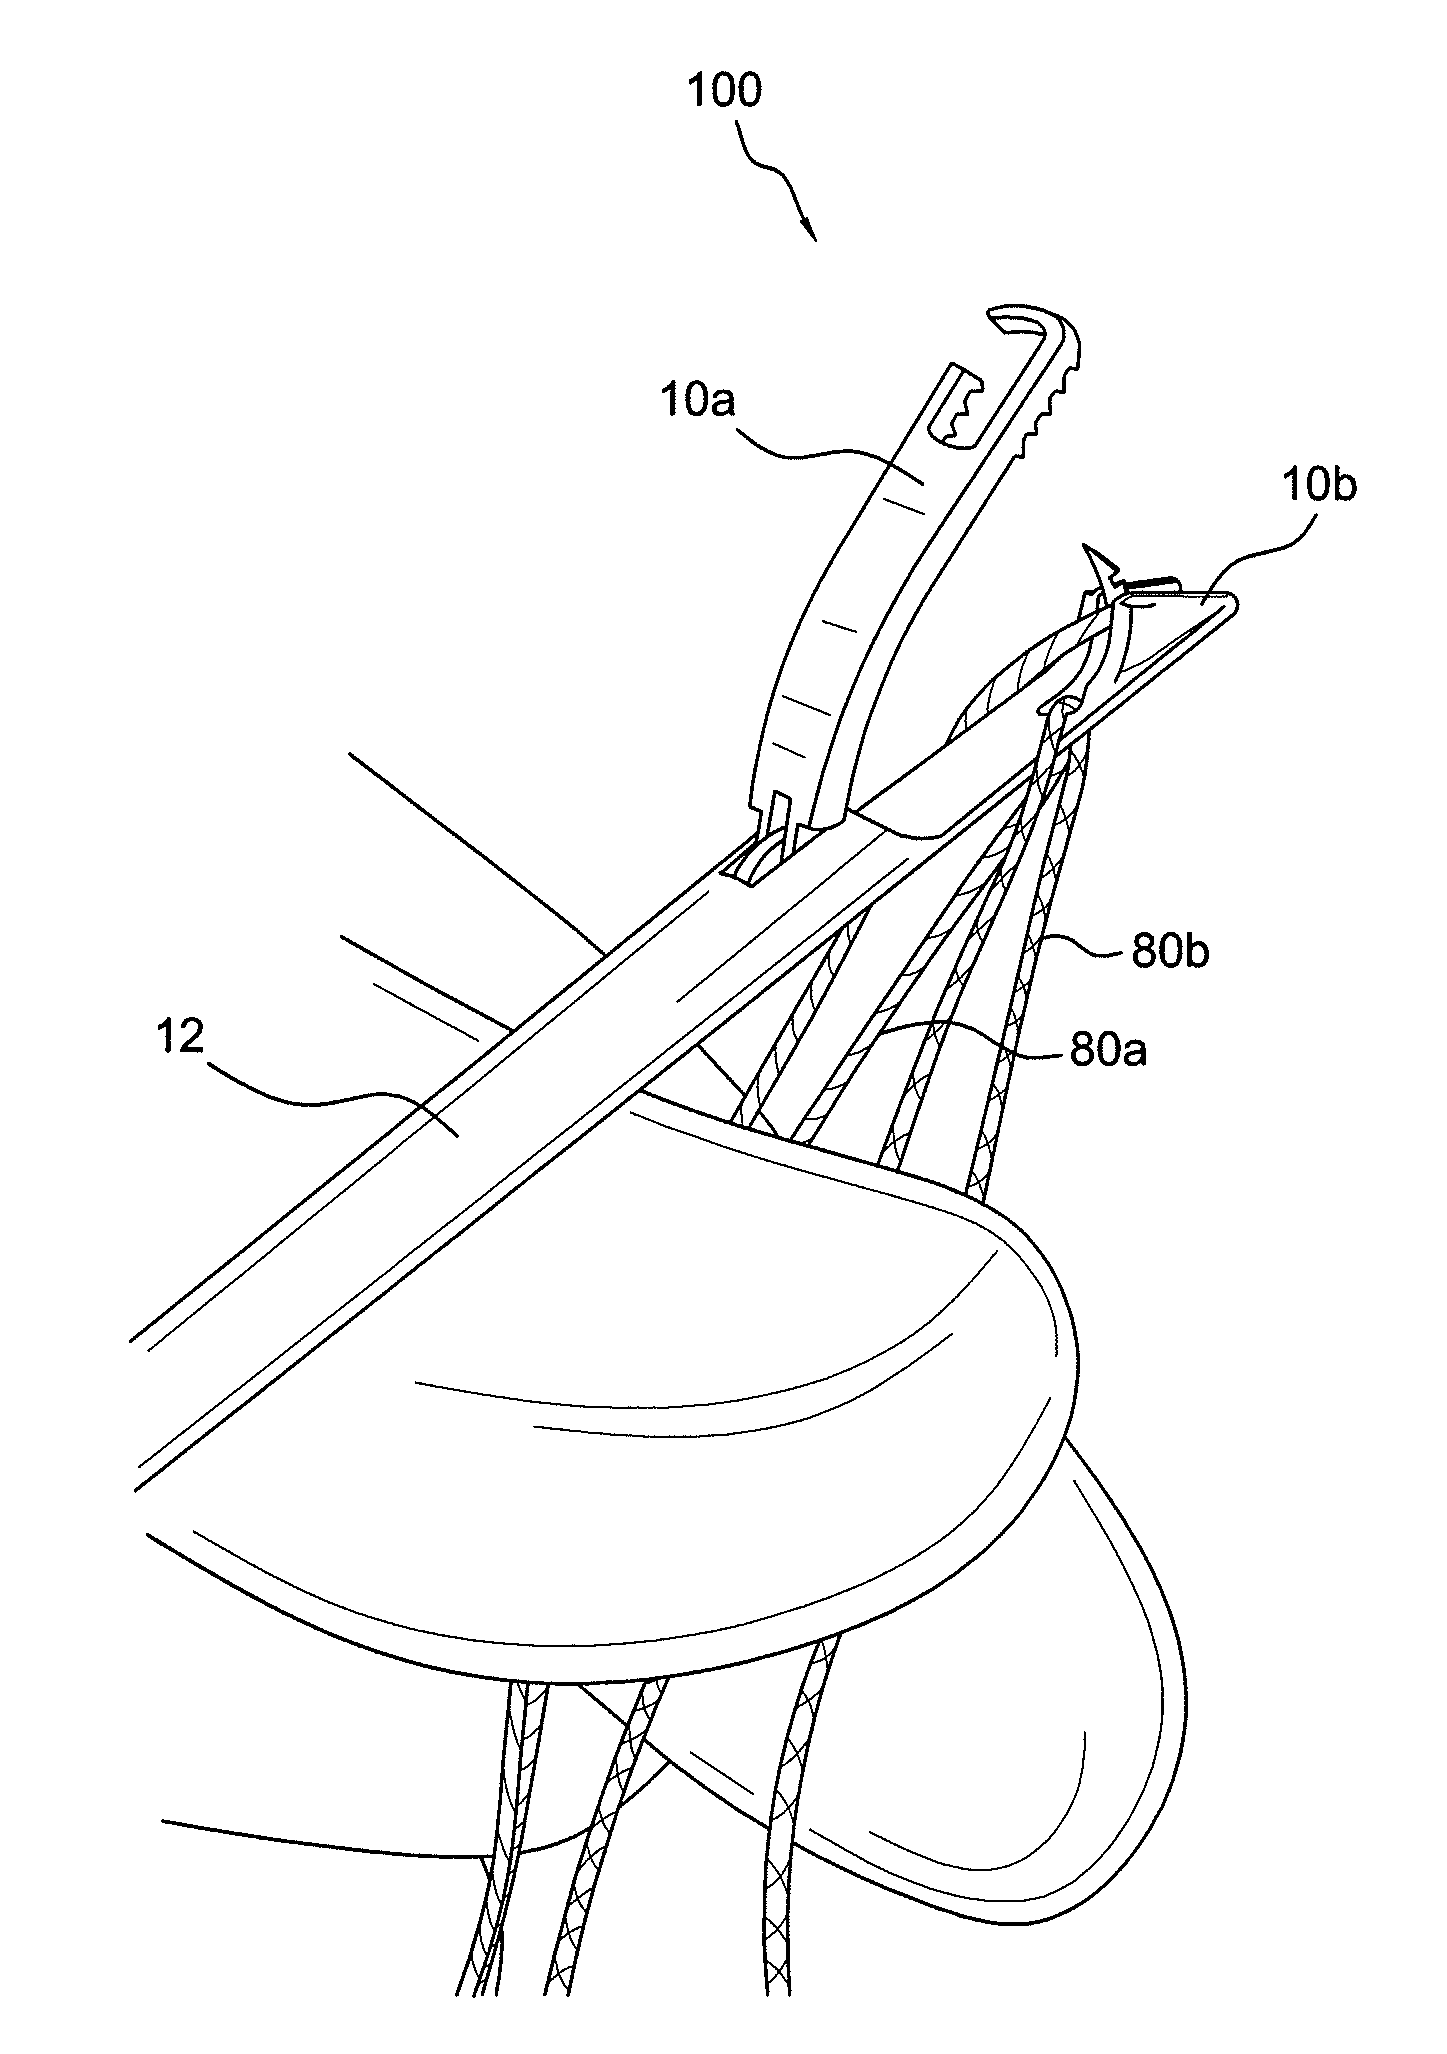 Suturing instrument and method for passing multiple sutures